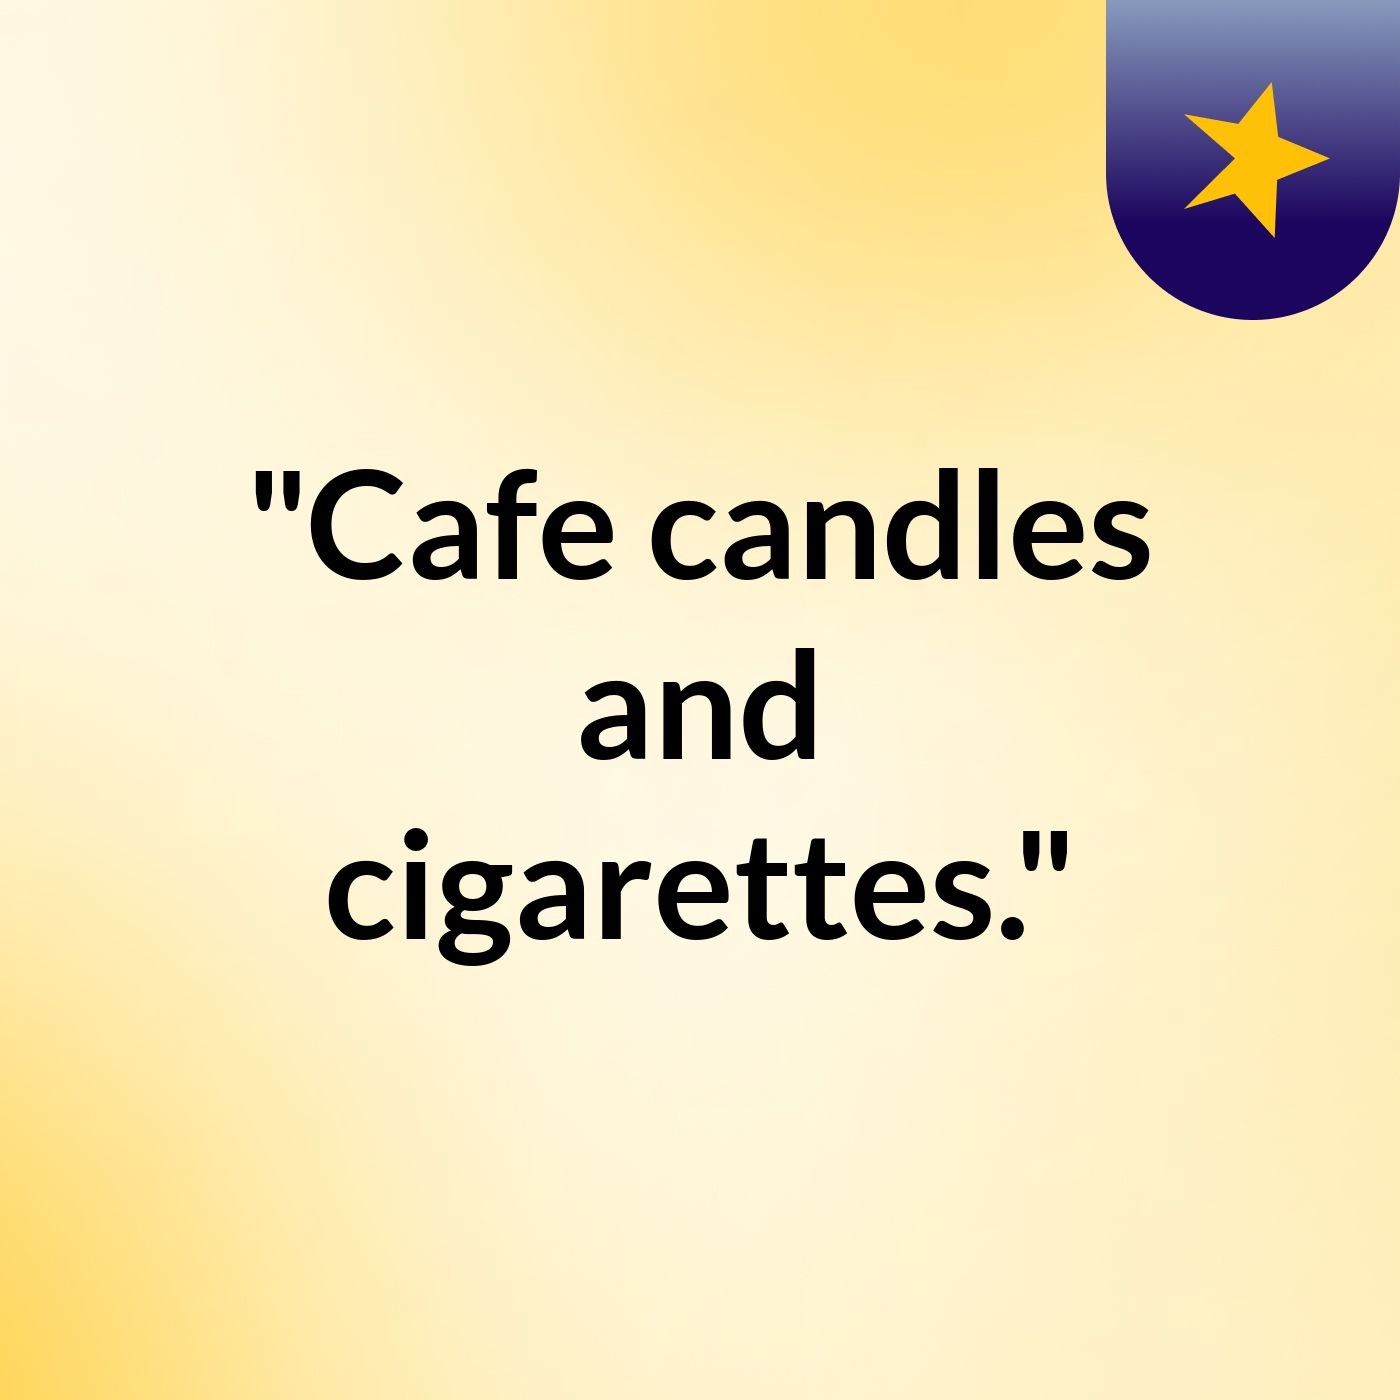 "Cafe candles and cigarettes."